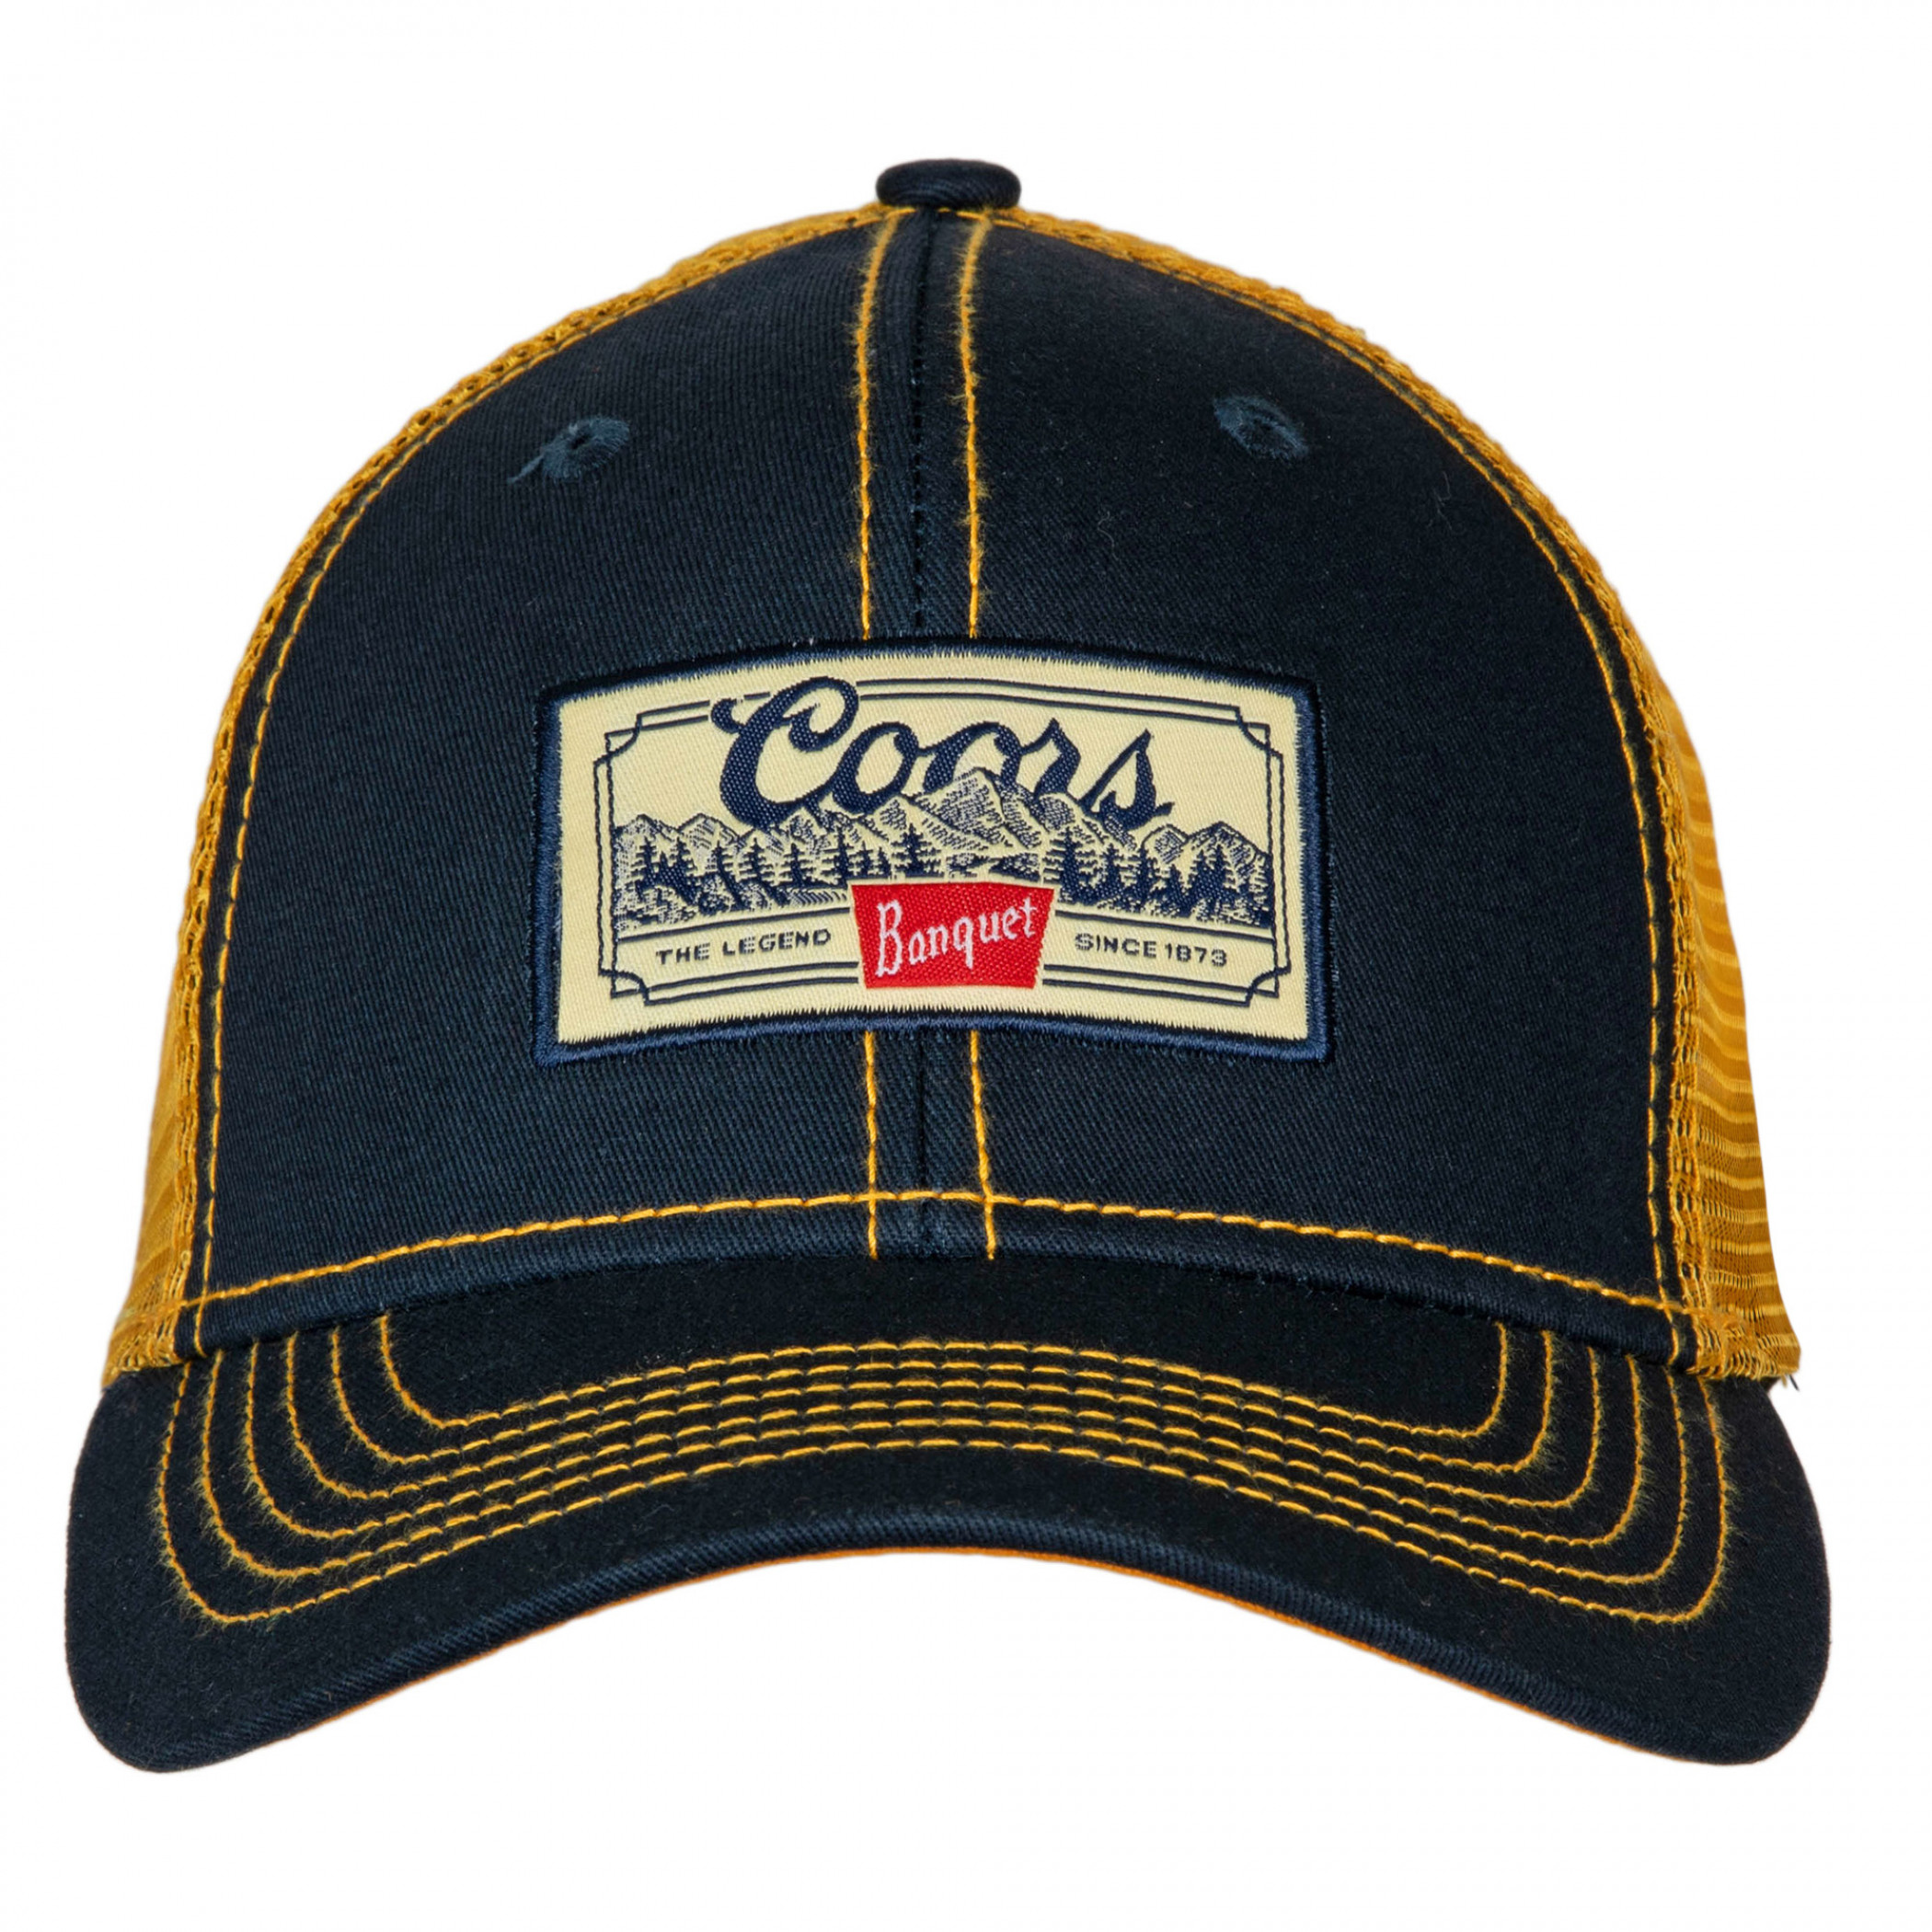 Coors Banquet Gold Cotton Twill Mesh Back Snapback Hat